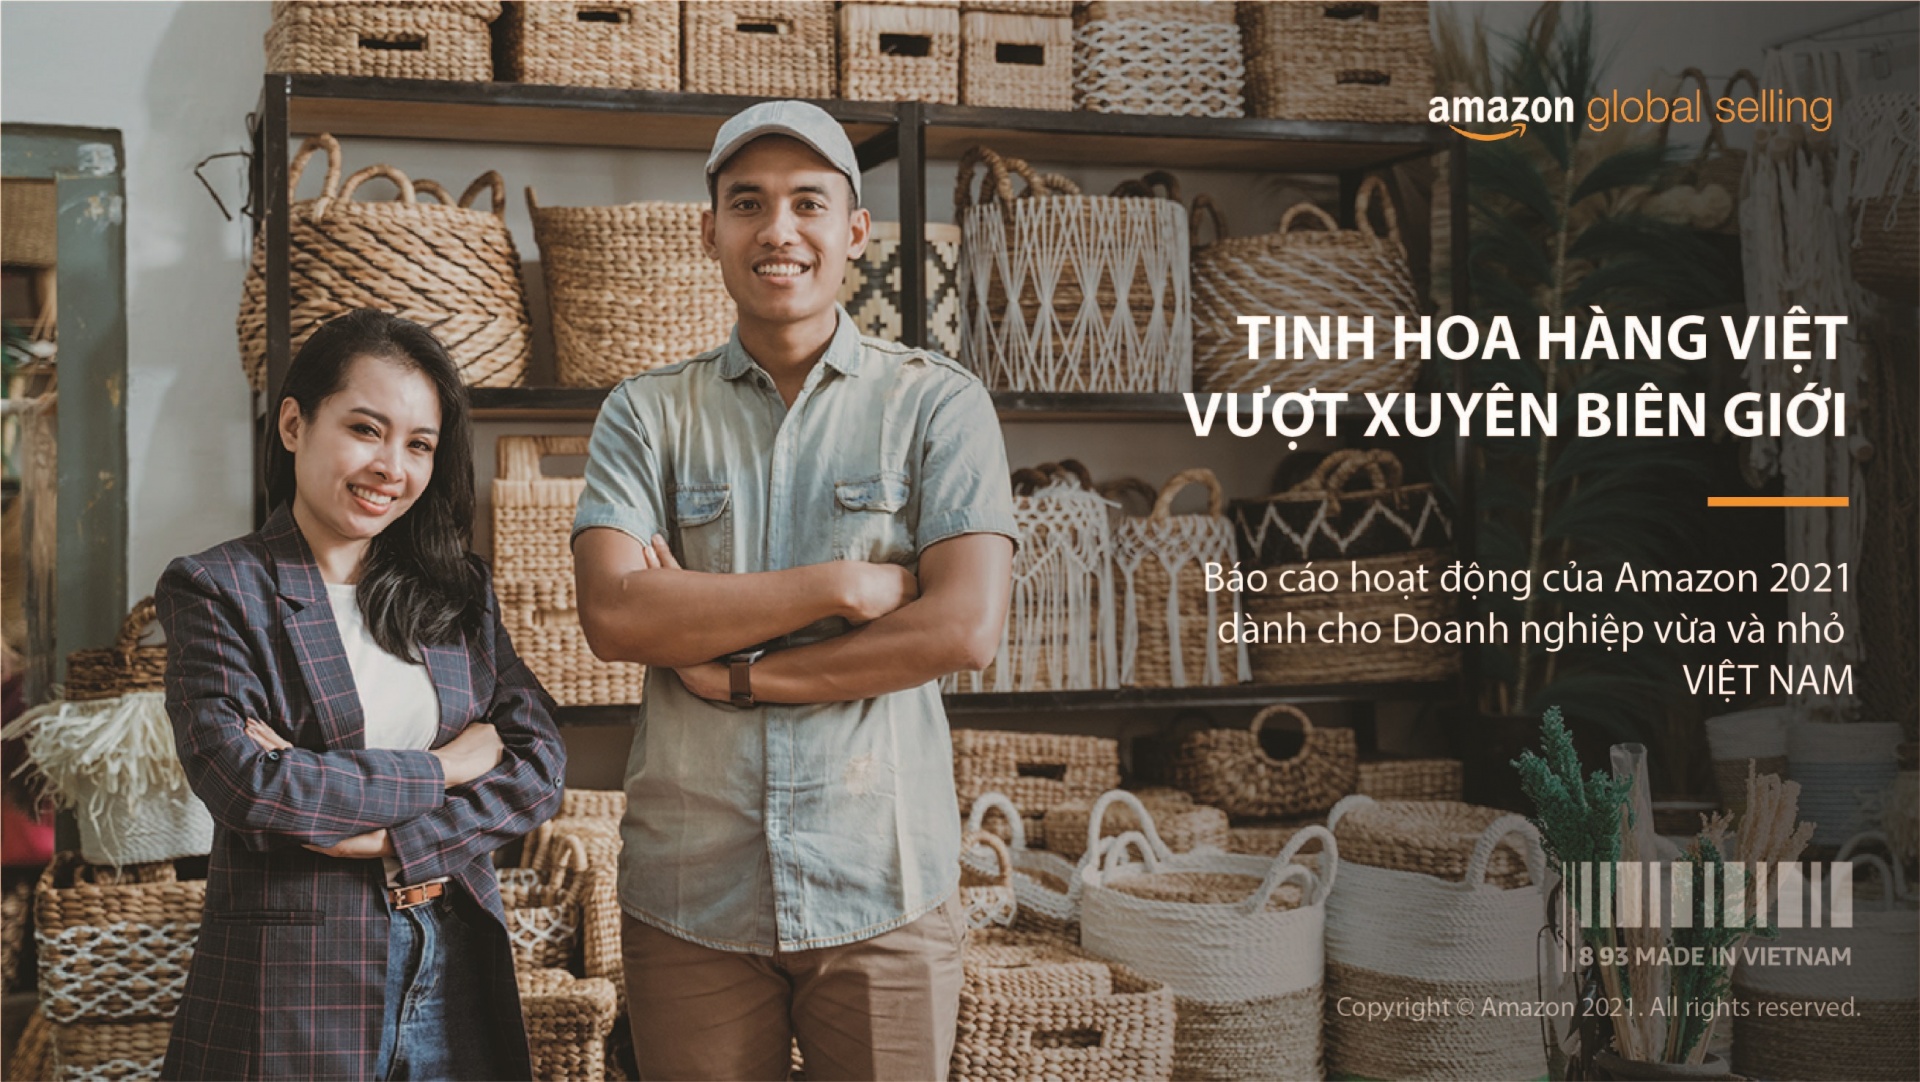 Opportunities and challenges for Vietnamese businesses to conquer the international markets